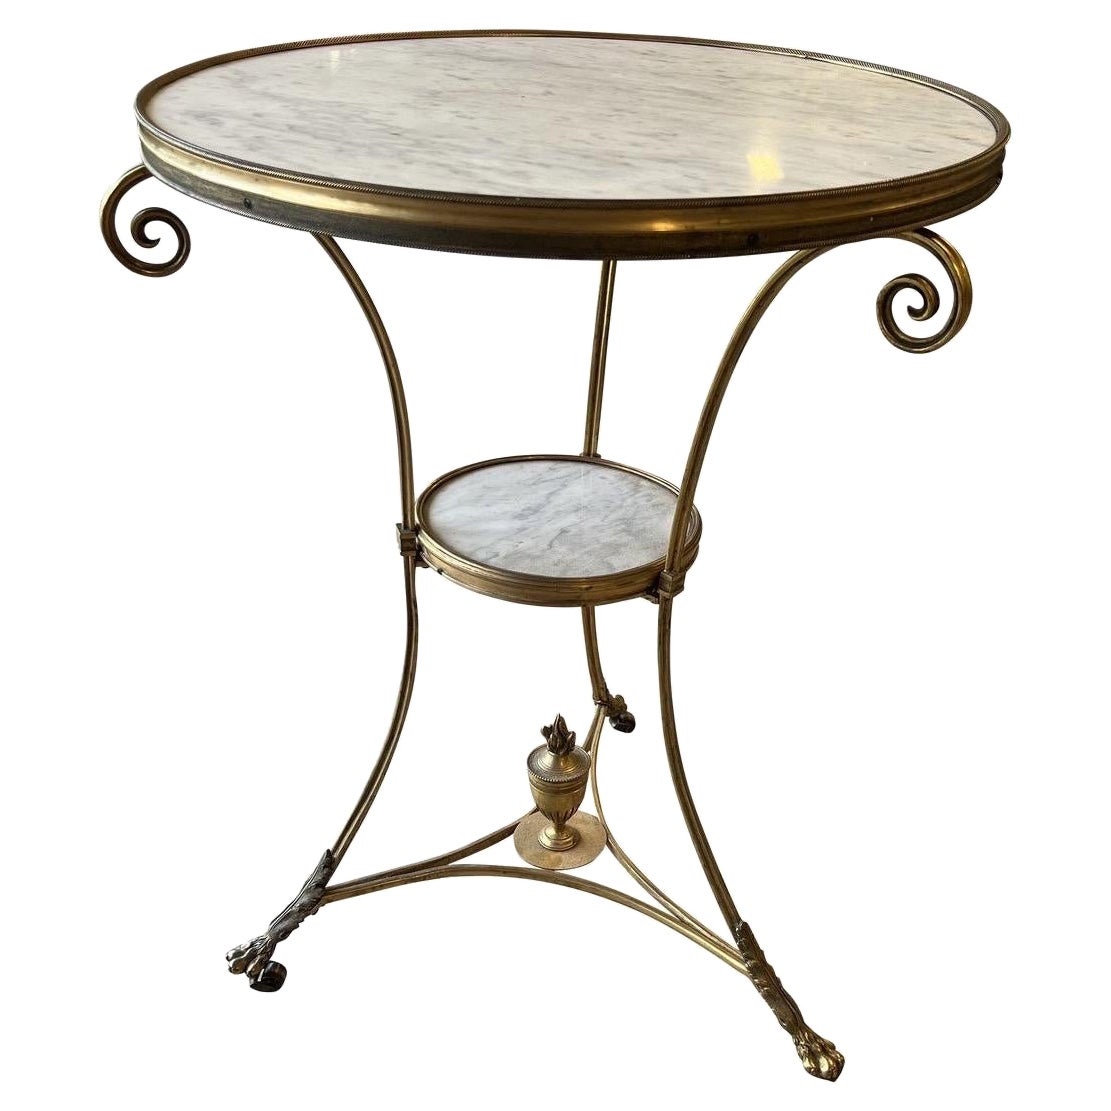 19th Century French Gilt Bronze & White Marble Two-Tiered Gueridon Table For Sale